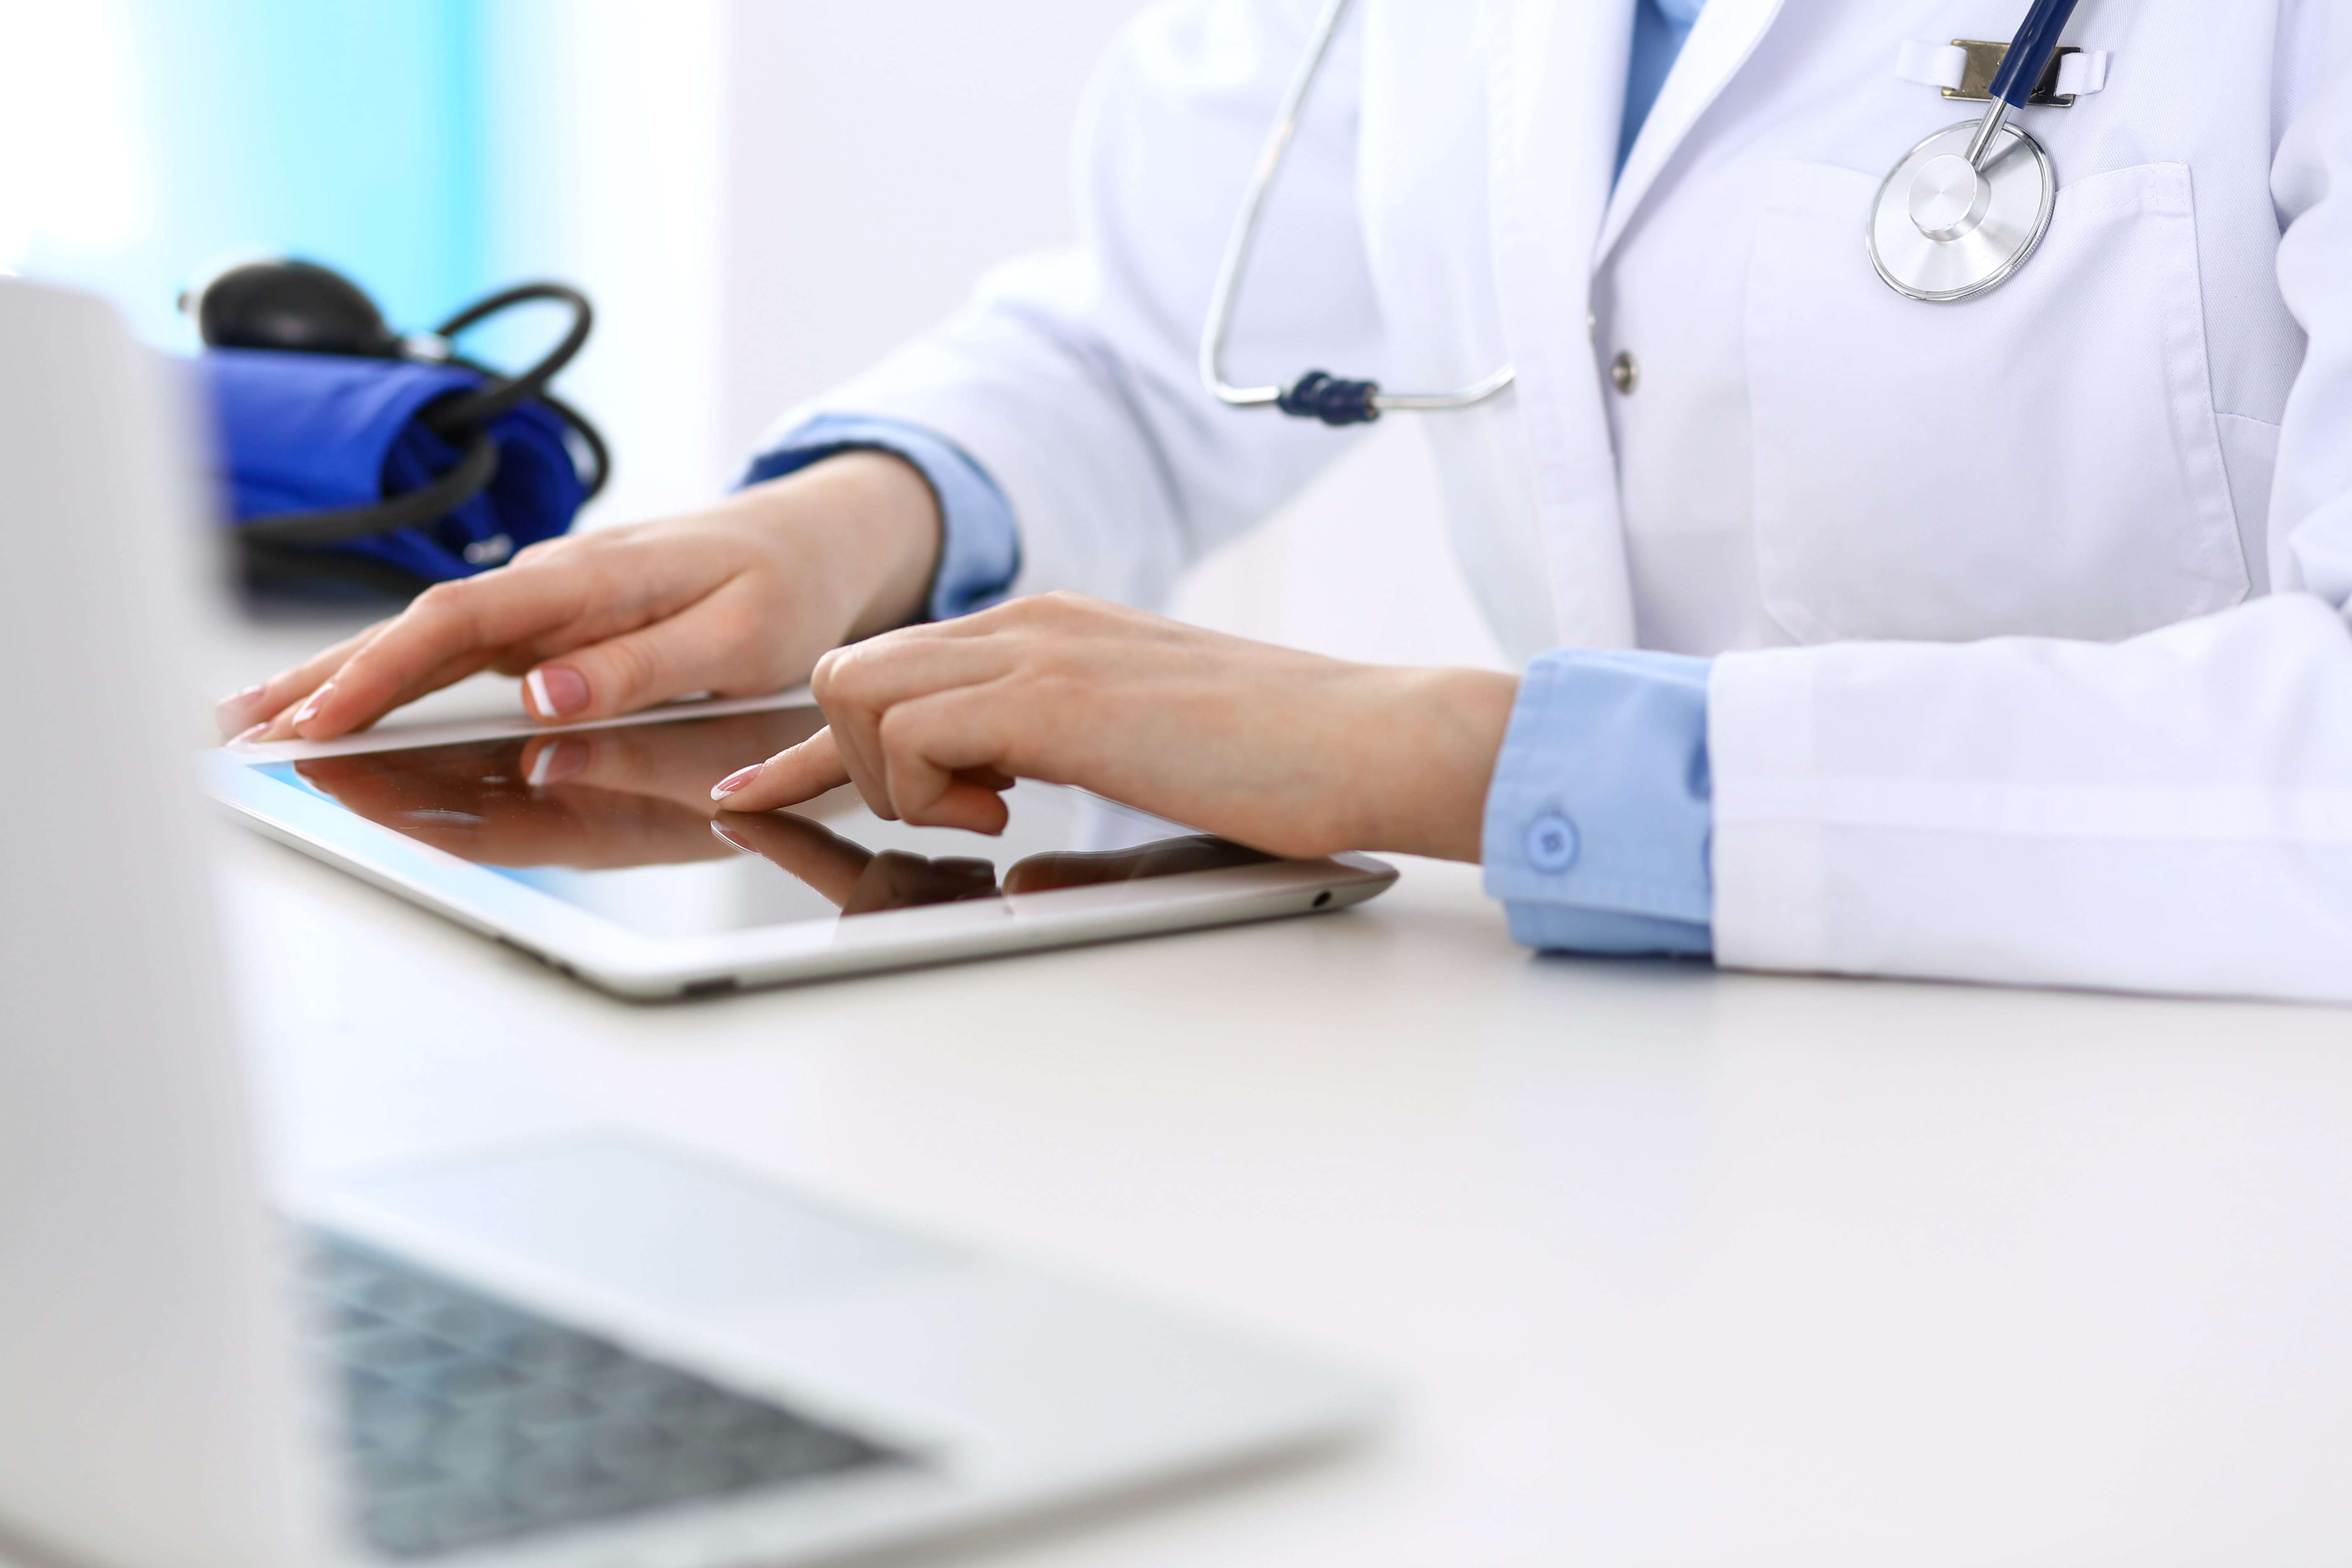 First-year doctors spend three times more hours on EHRs than patient care